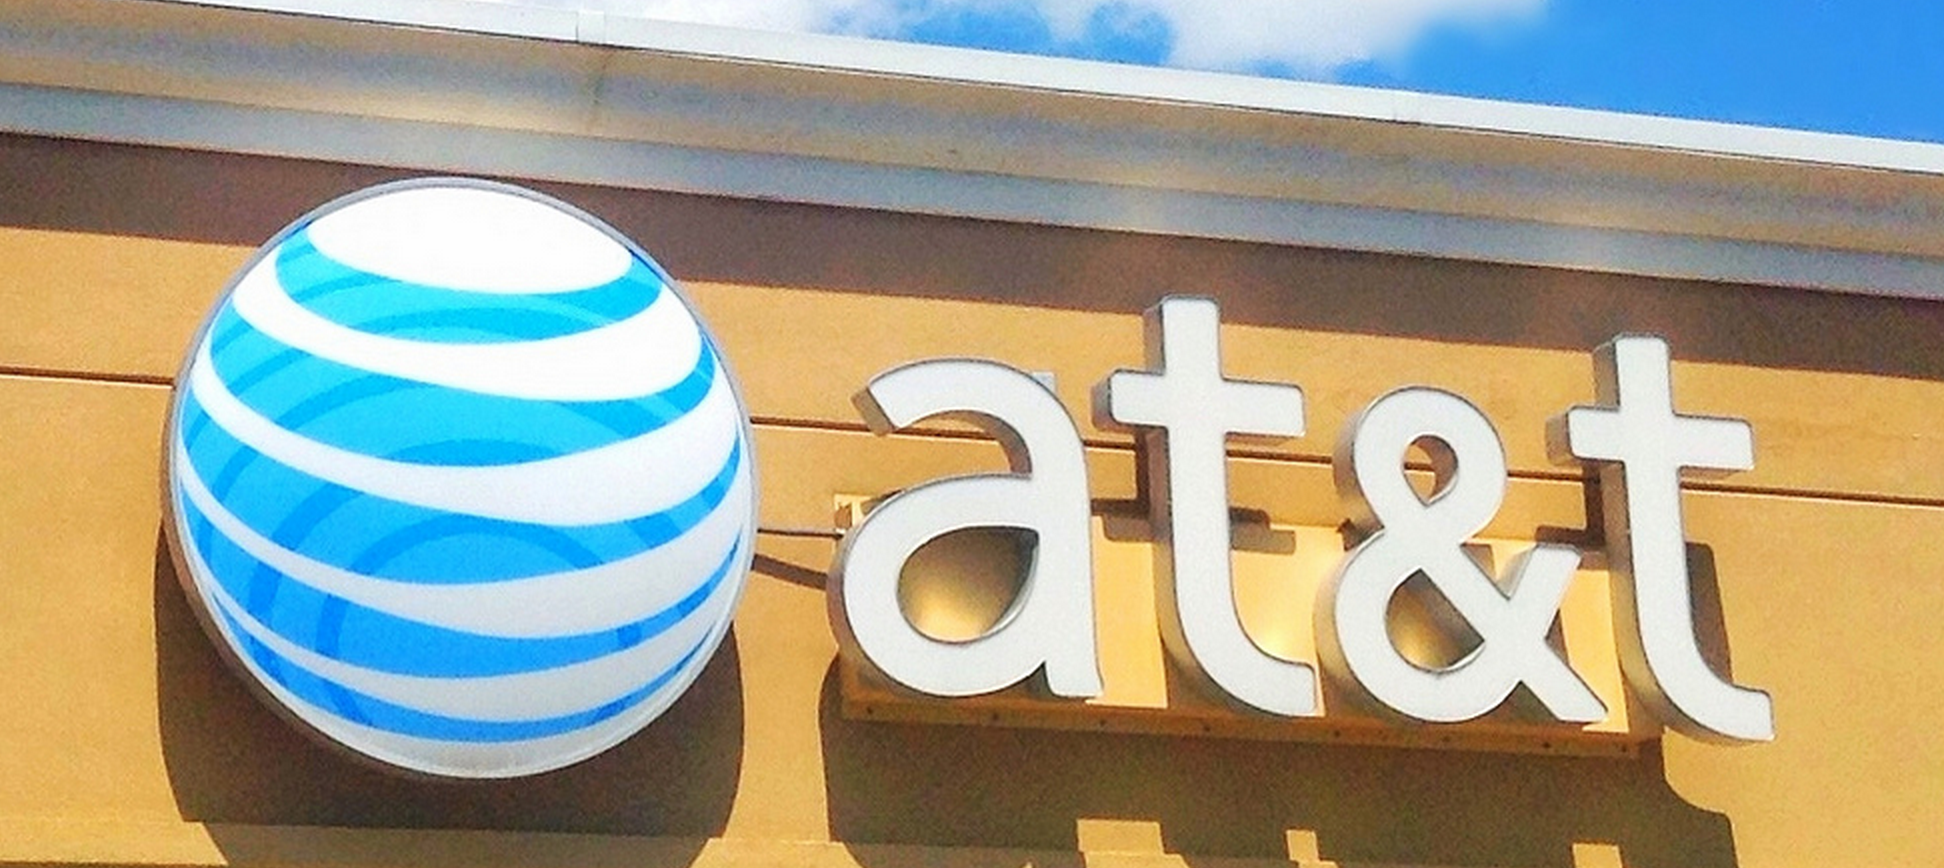 83-Year-Old Racks Up $24,289 In AT&T Charges By Still Using AOL Dial-Up